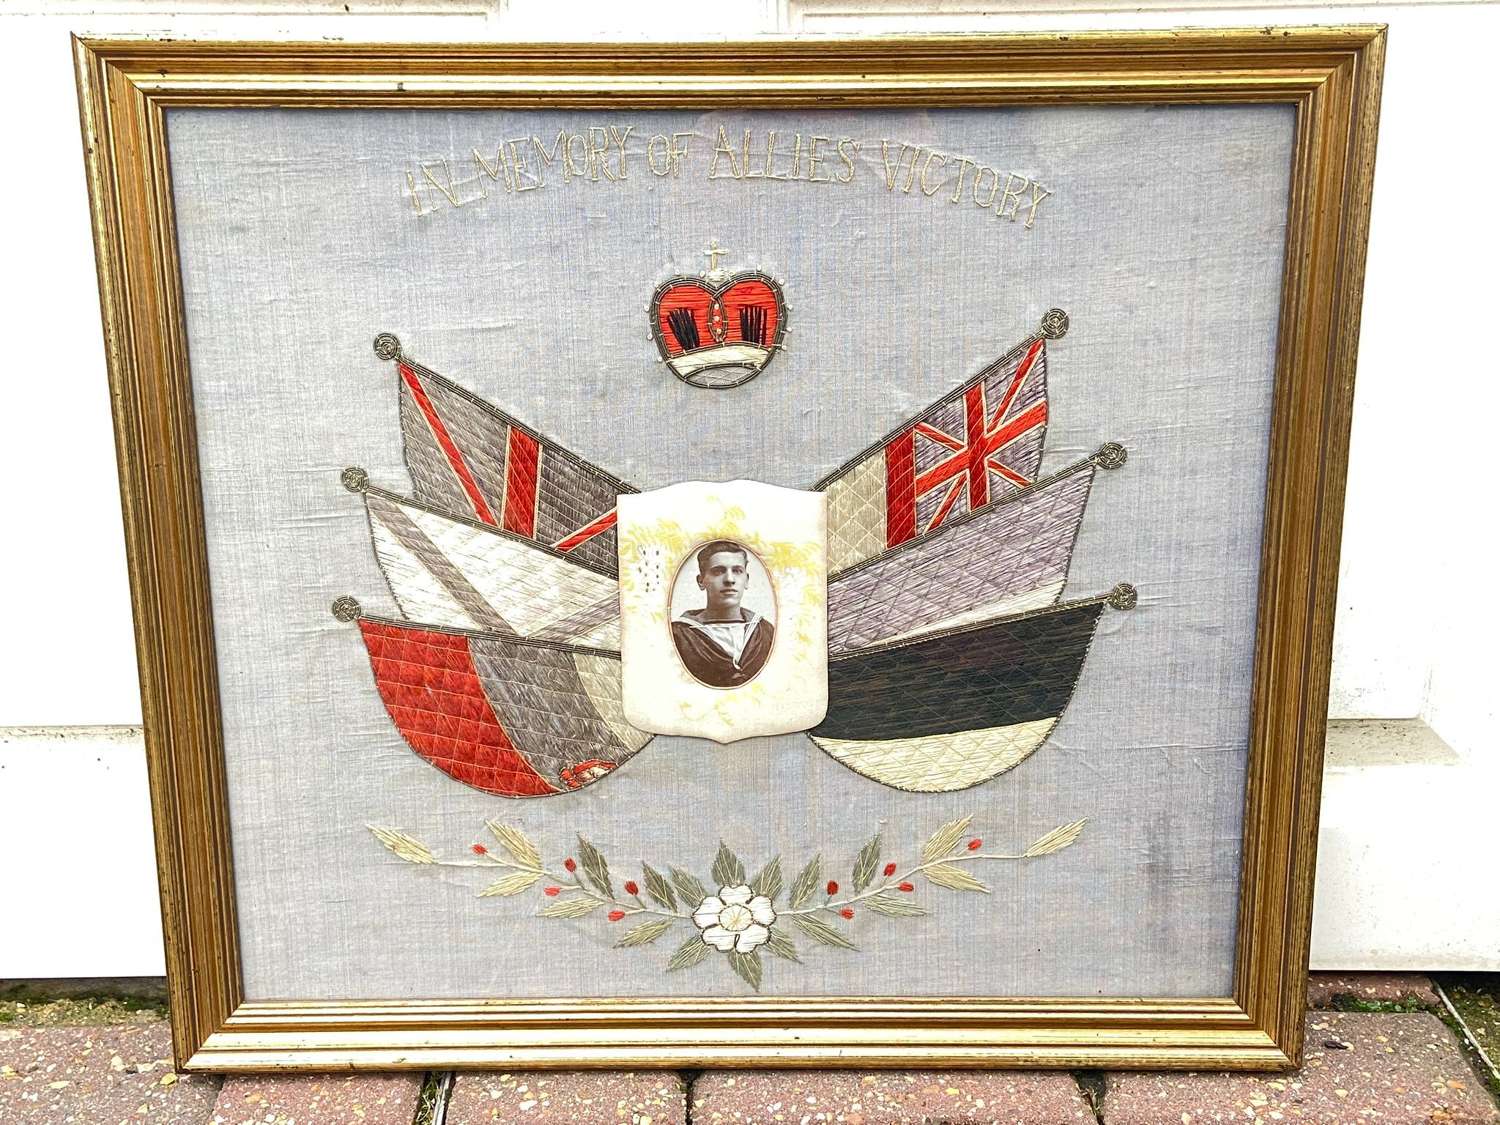 WWI British Royal Navy “In Memory Of Allies Victory” Embroidered Silk